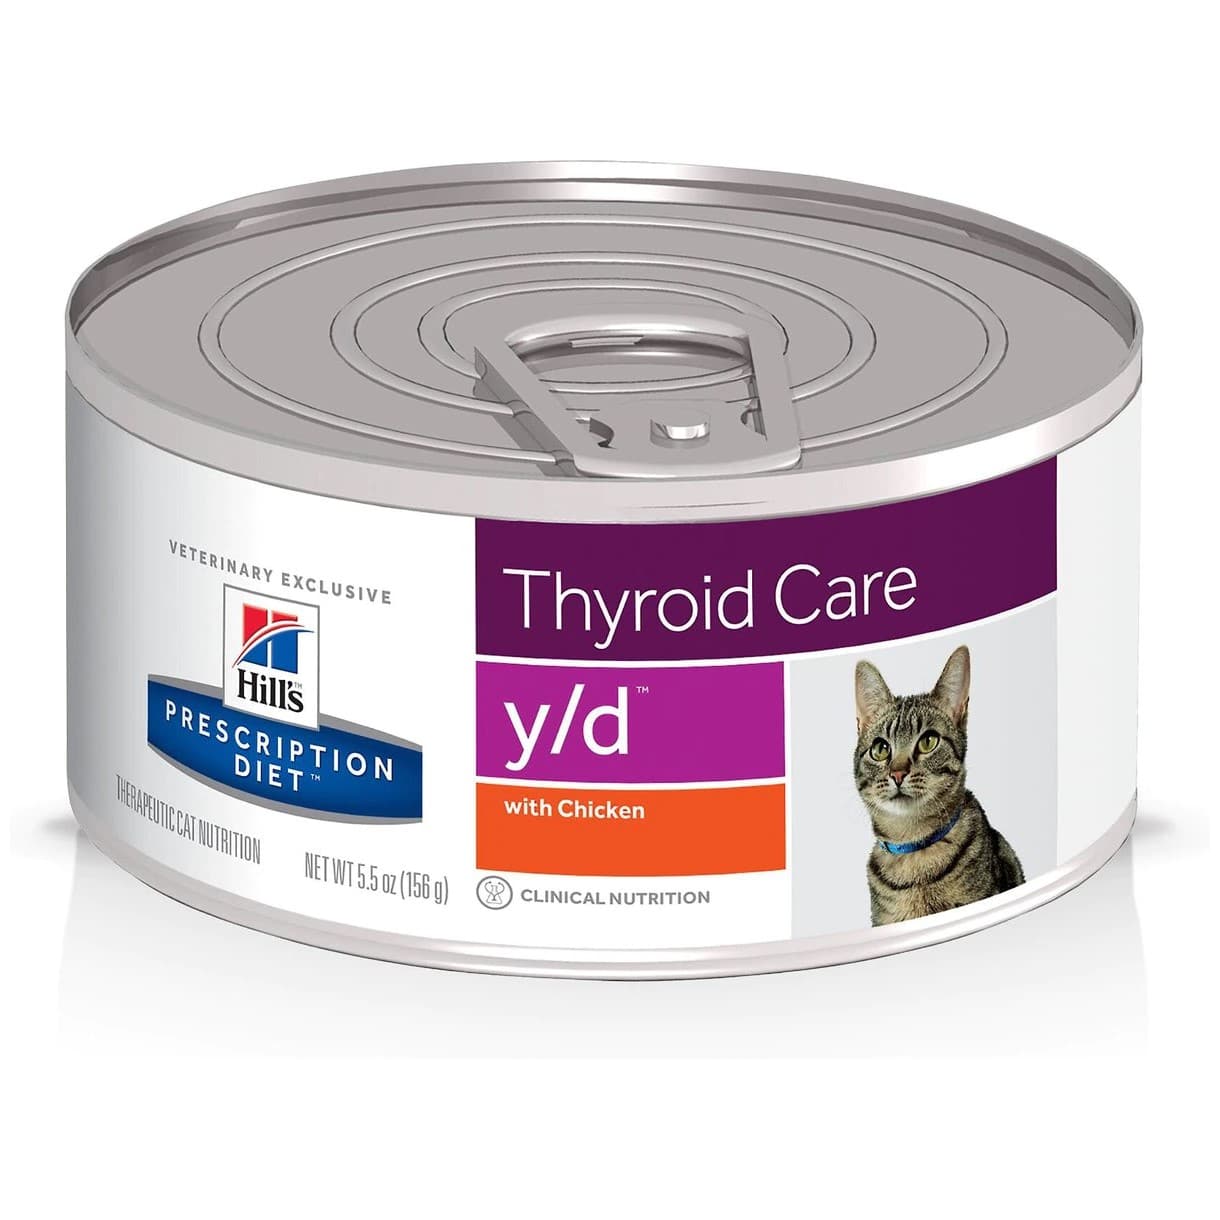 Hill's Prescription Diet y/d Thyroid Care with Chicken Wet Cat Food